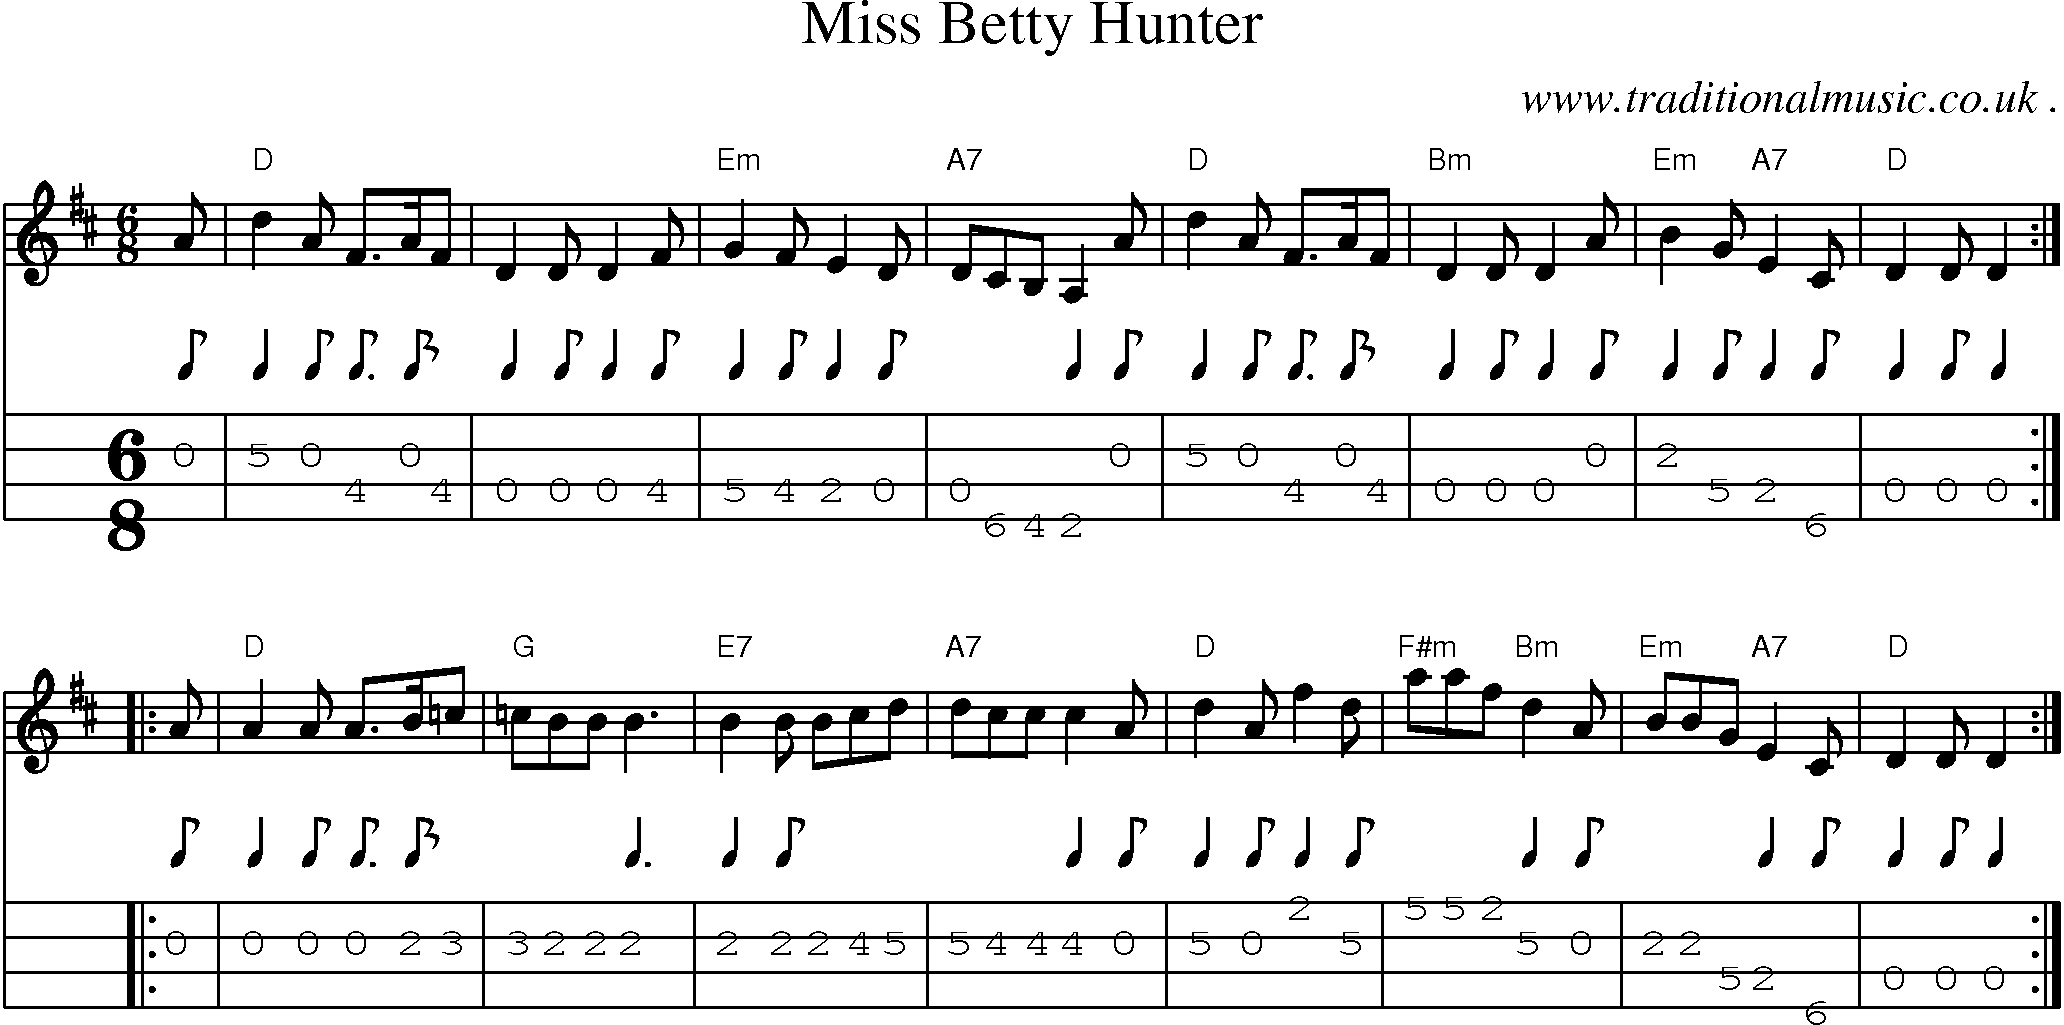 Sheet-music  score, Chords and Mandolin Tabs for Miss Betty Hunter